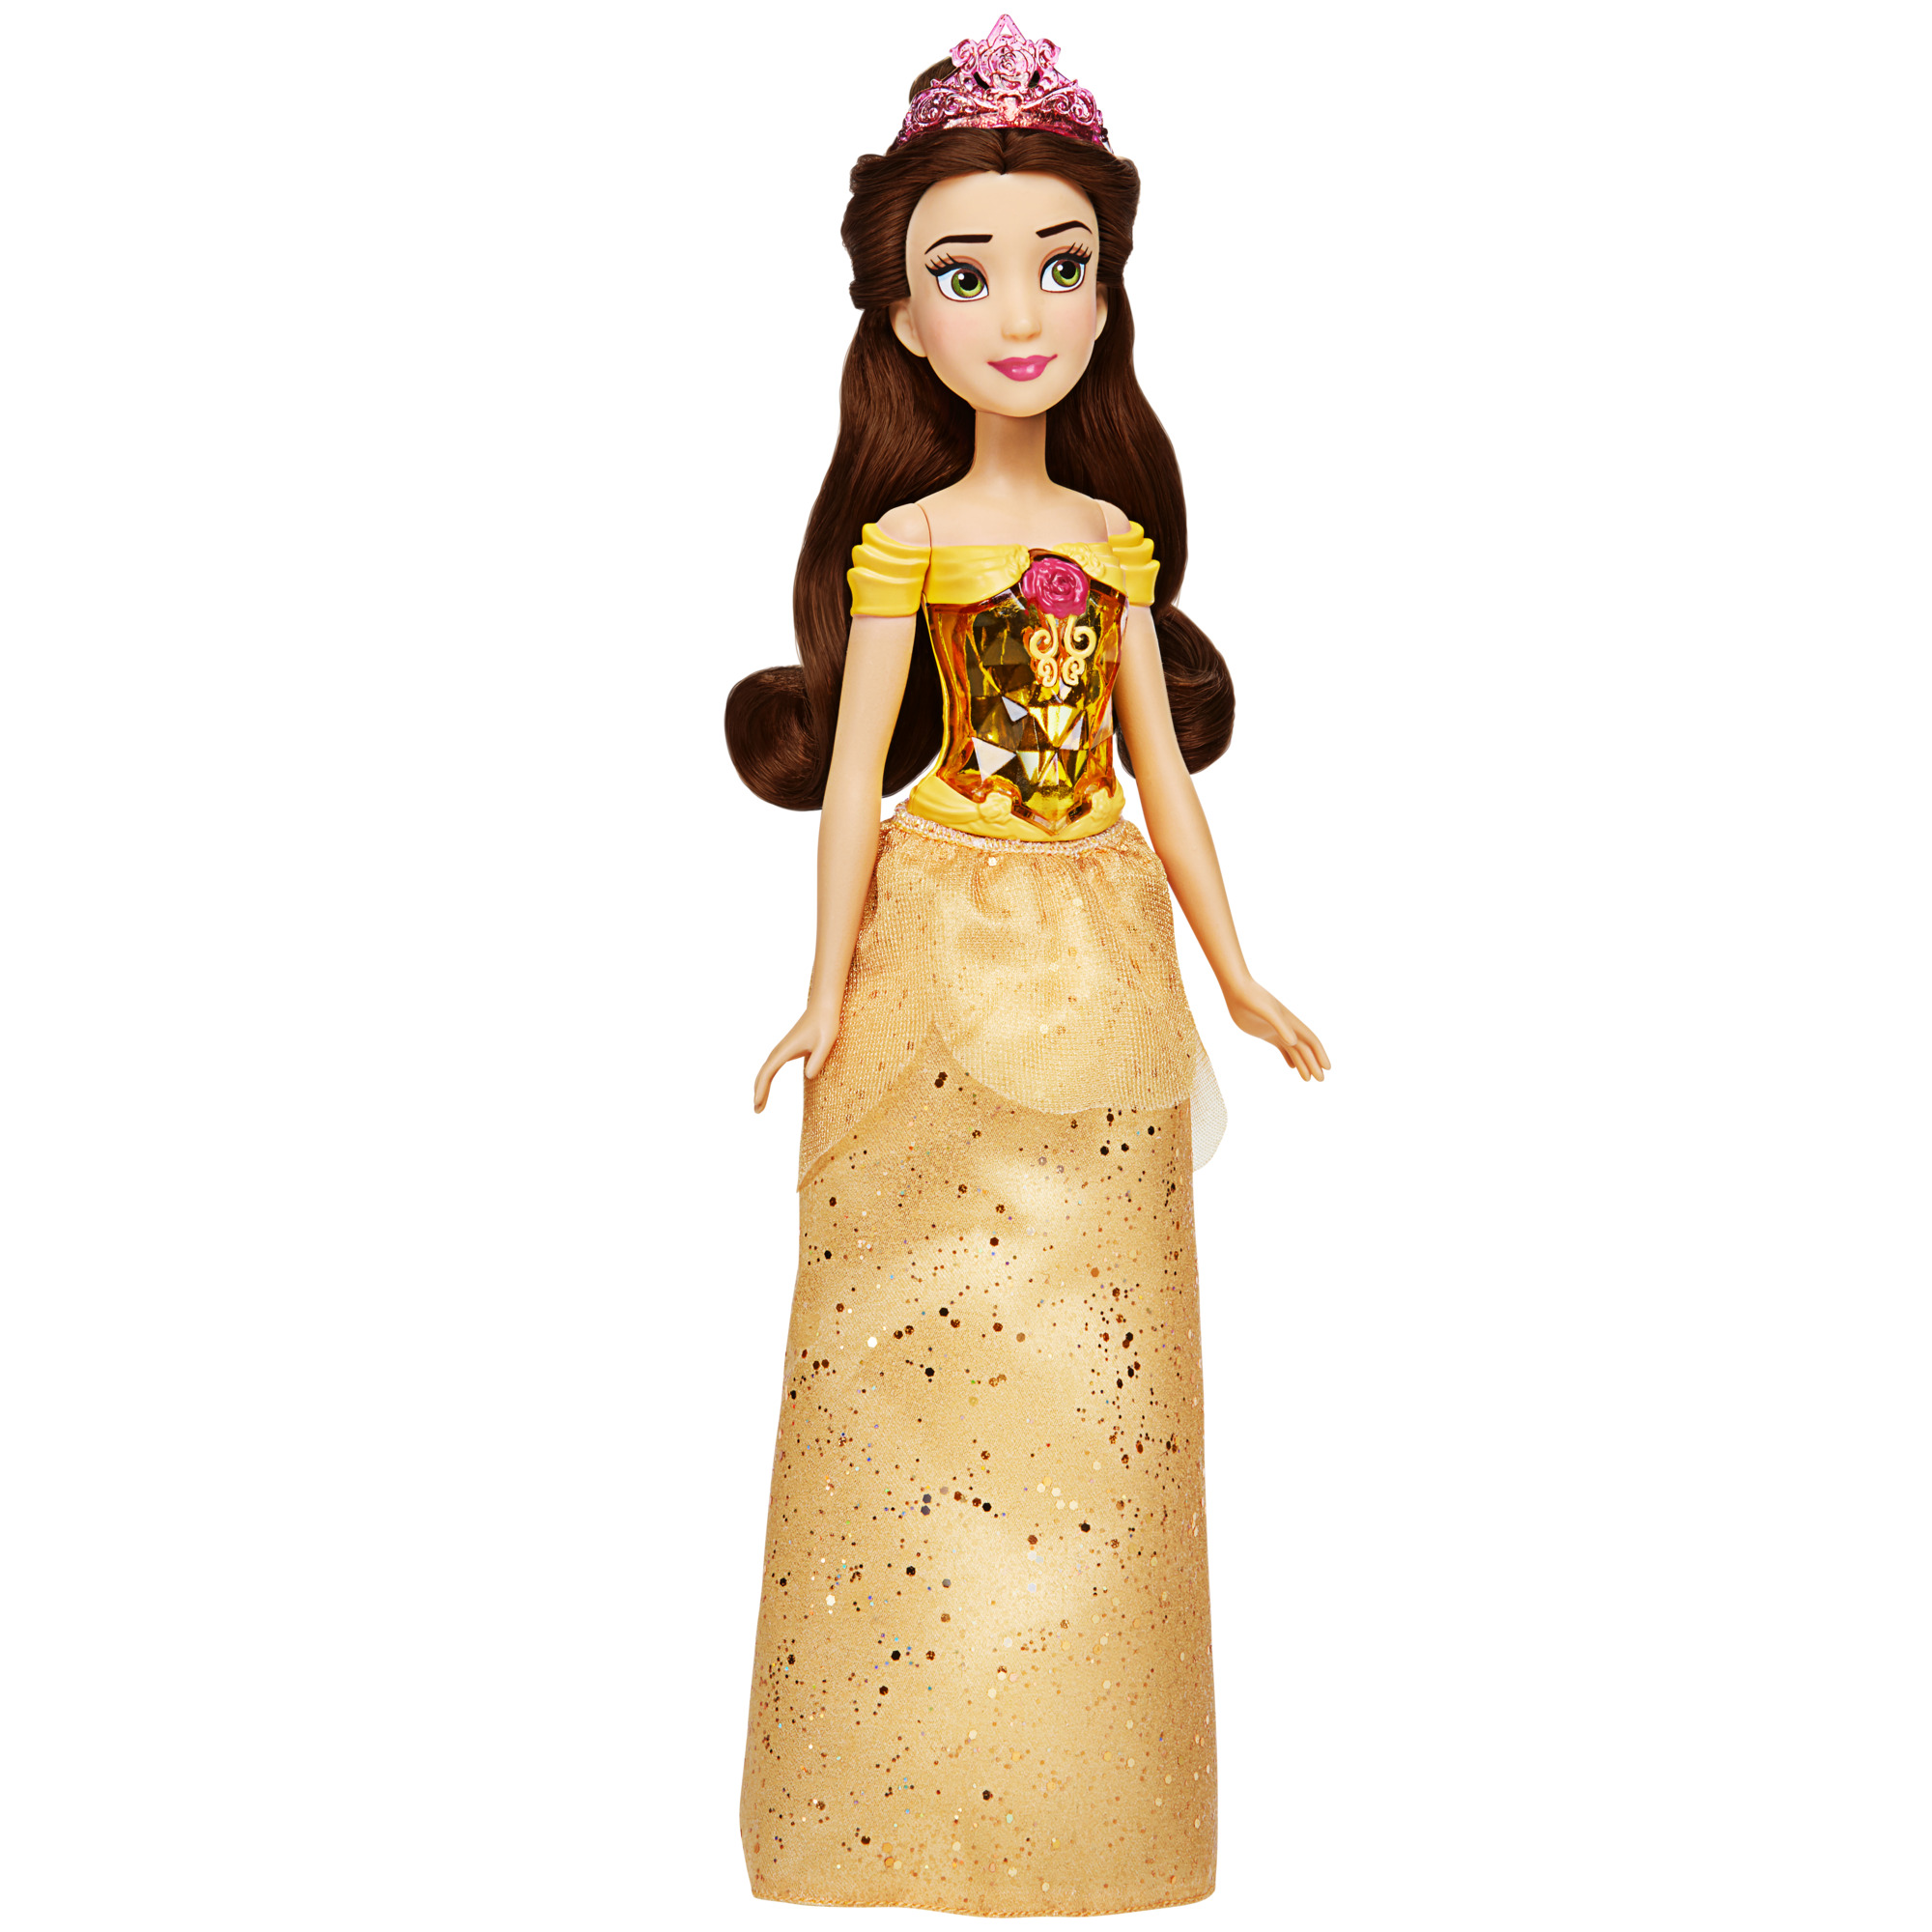 Disney Princess Royal Shimmer Belle Doll, Fashion Doll, Skirt and Accessories - image 1 of 9